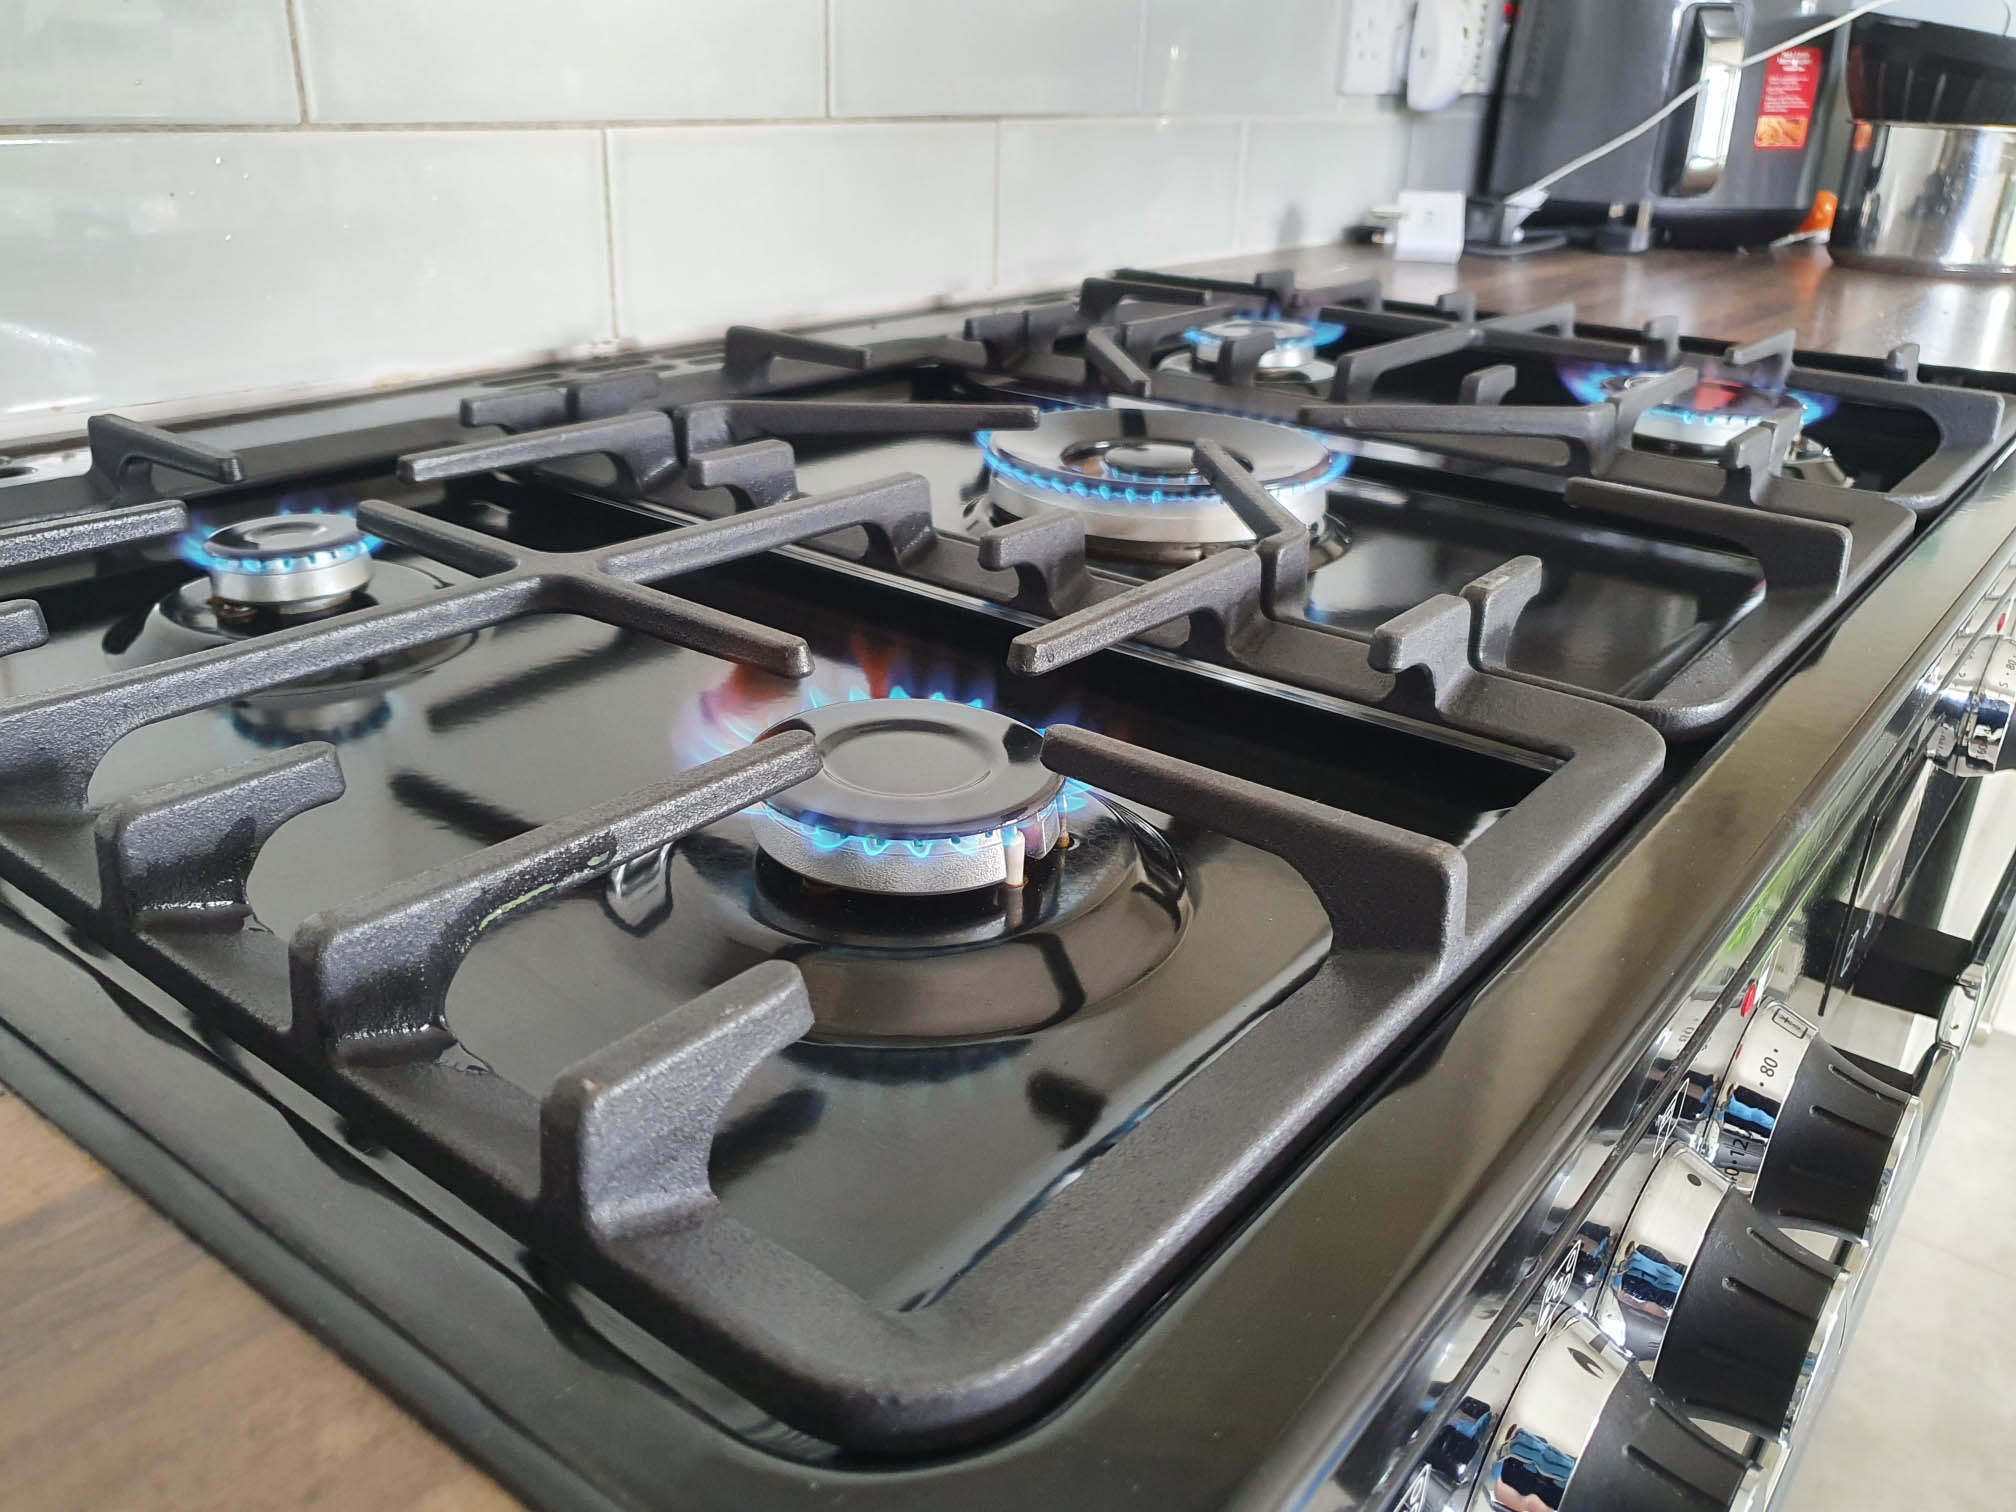 Gas Hob | Clean Oven Belfast | Oven Cleaning NI | Oven Clean ni | Kitchen Cleaning NI | Oven Cleaning Belfast | Kitchen Appliance Cleaning Belfast | Oven Clean NI